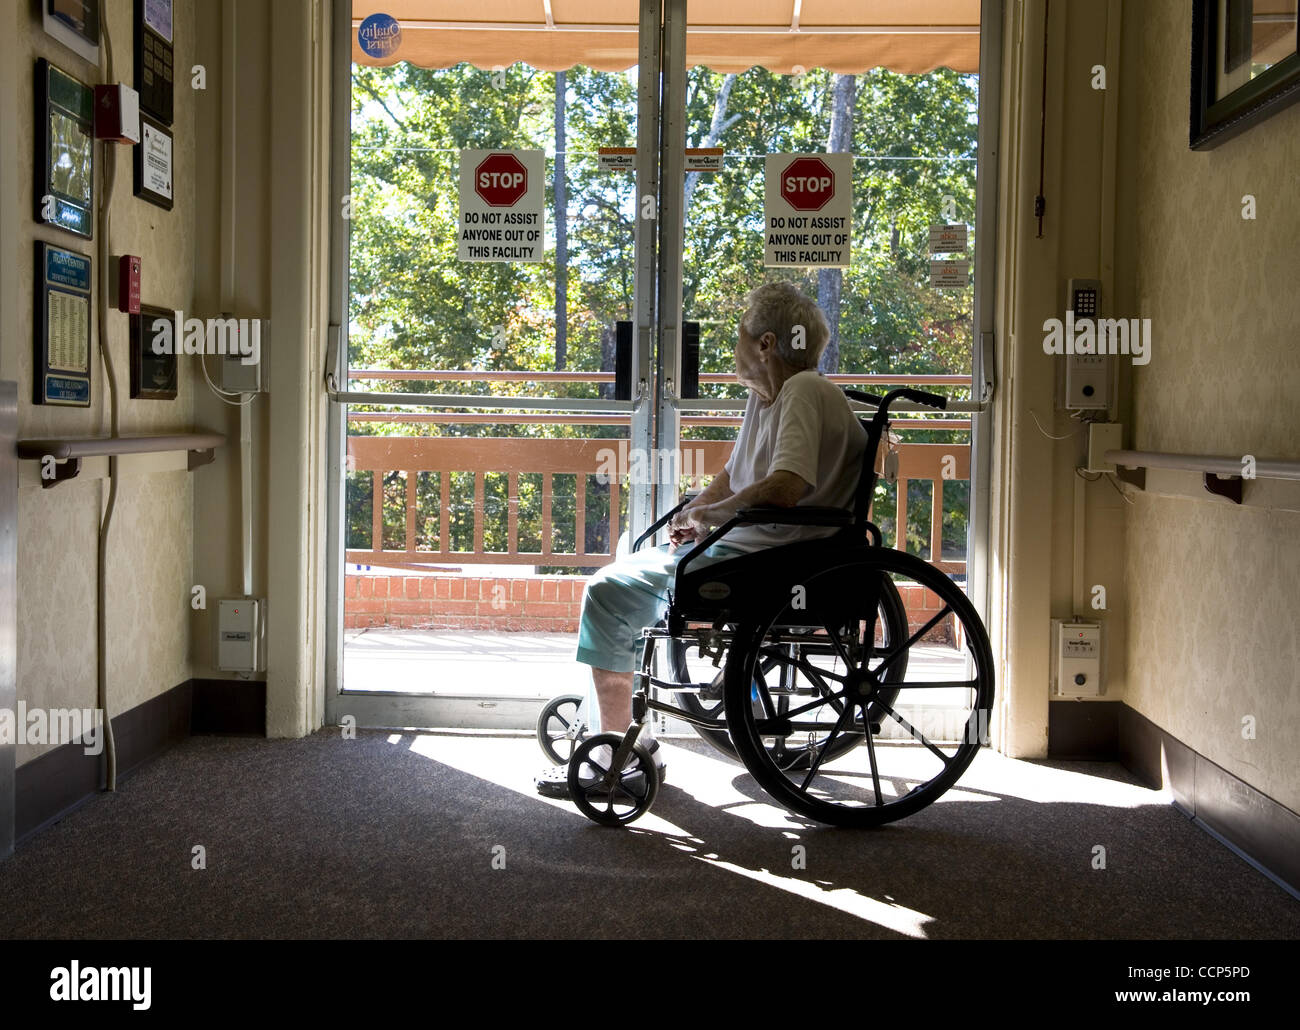 Oct. 22, 2010 - Canton, GA, USA - Patient in a wheelchair gazes out secured door of a nursing home.  The cost of receiving long-term care services at home is increasing, but not nearly as rapidly as the cost of nursing home or assisted living services, according to recent survey findings..Over the p Stock Photo